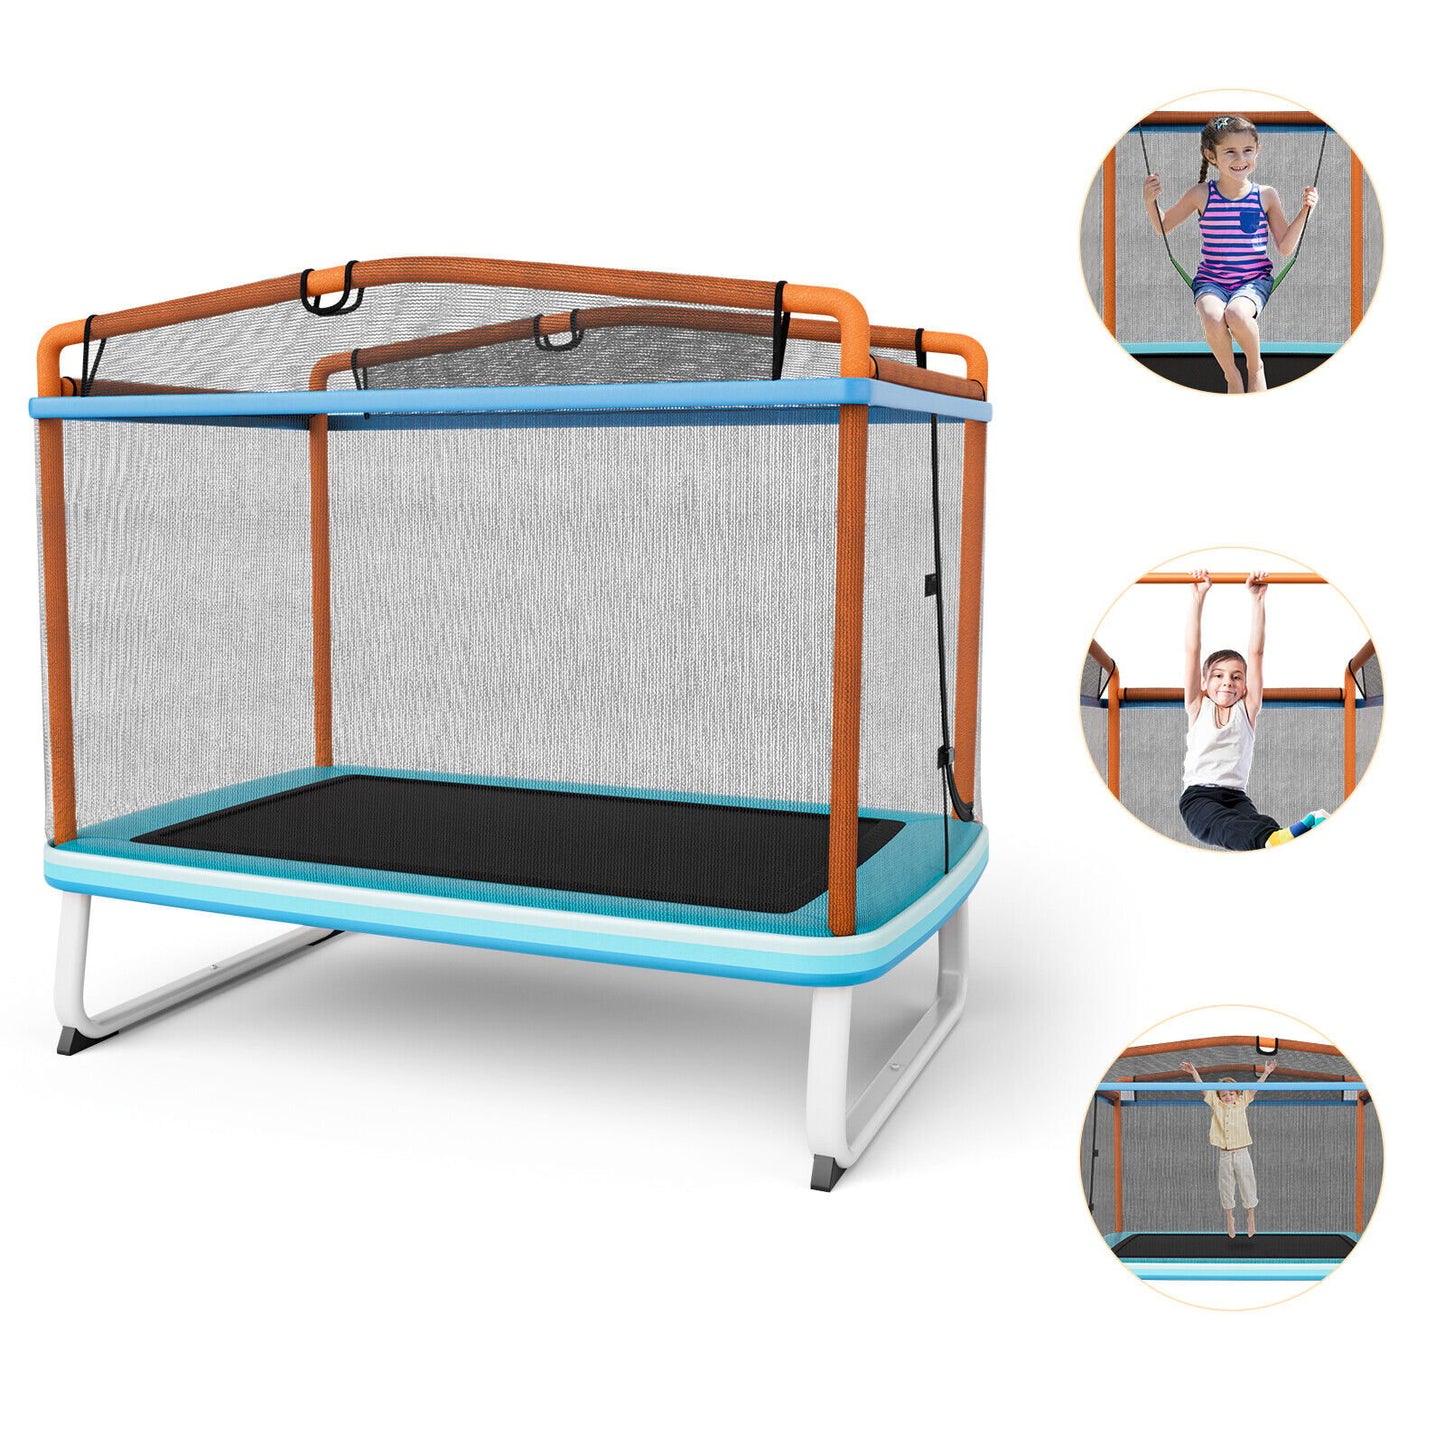 6 Feet Rectangle Trampoline with Swing Horizontal Bar and Safety Net, Orange